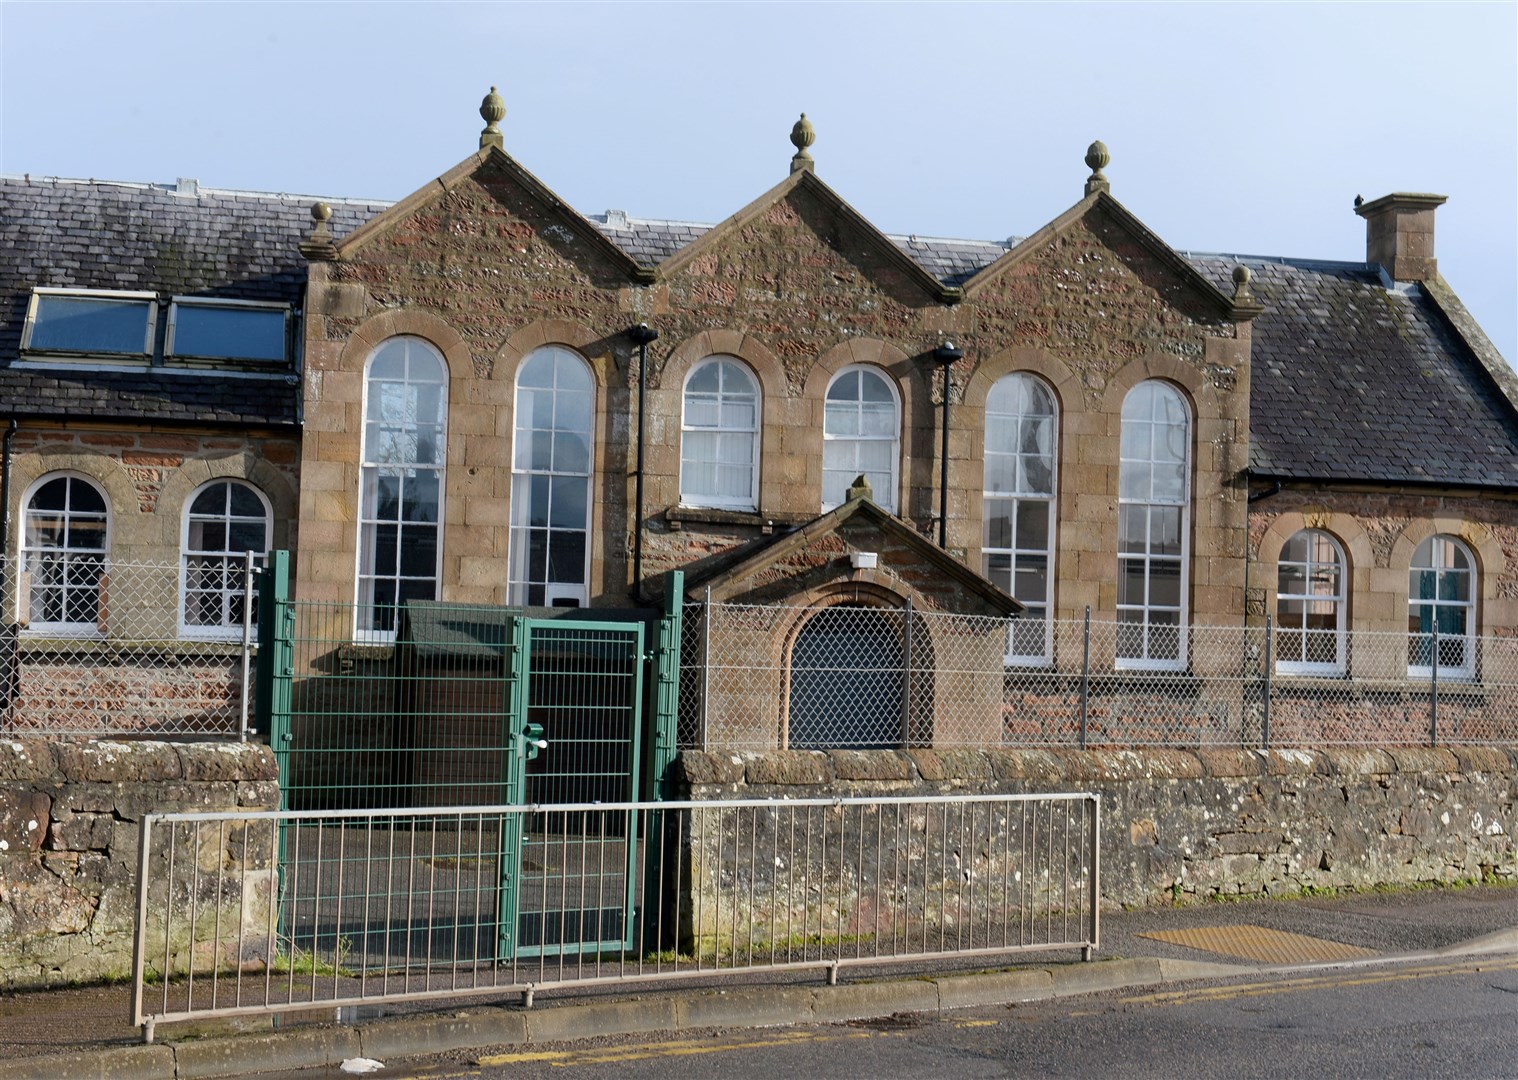 The Victorian-era buildings that make up the St Clement's special school have been described as 'unfit for purpose'. Highland Council has accepted the need for a replacement but a definite funding package remains elusive. Picture Gary Anthony.